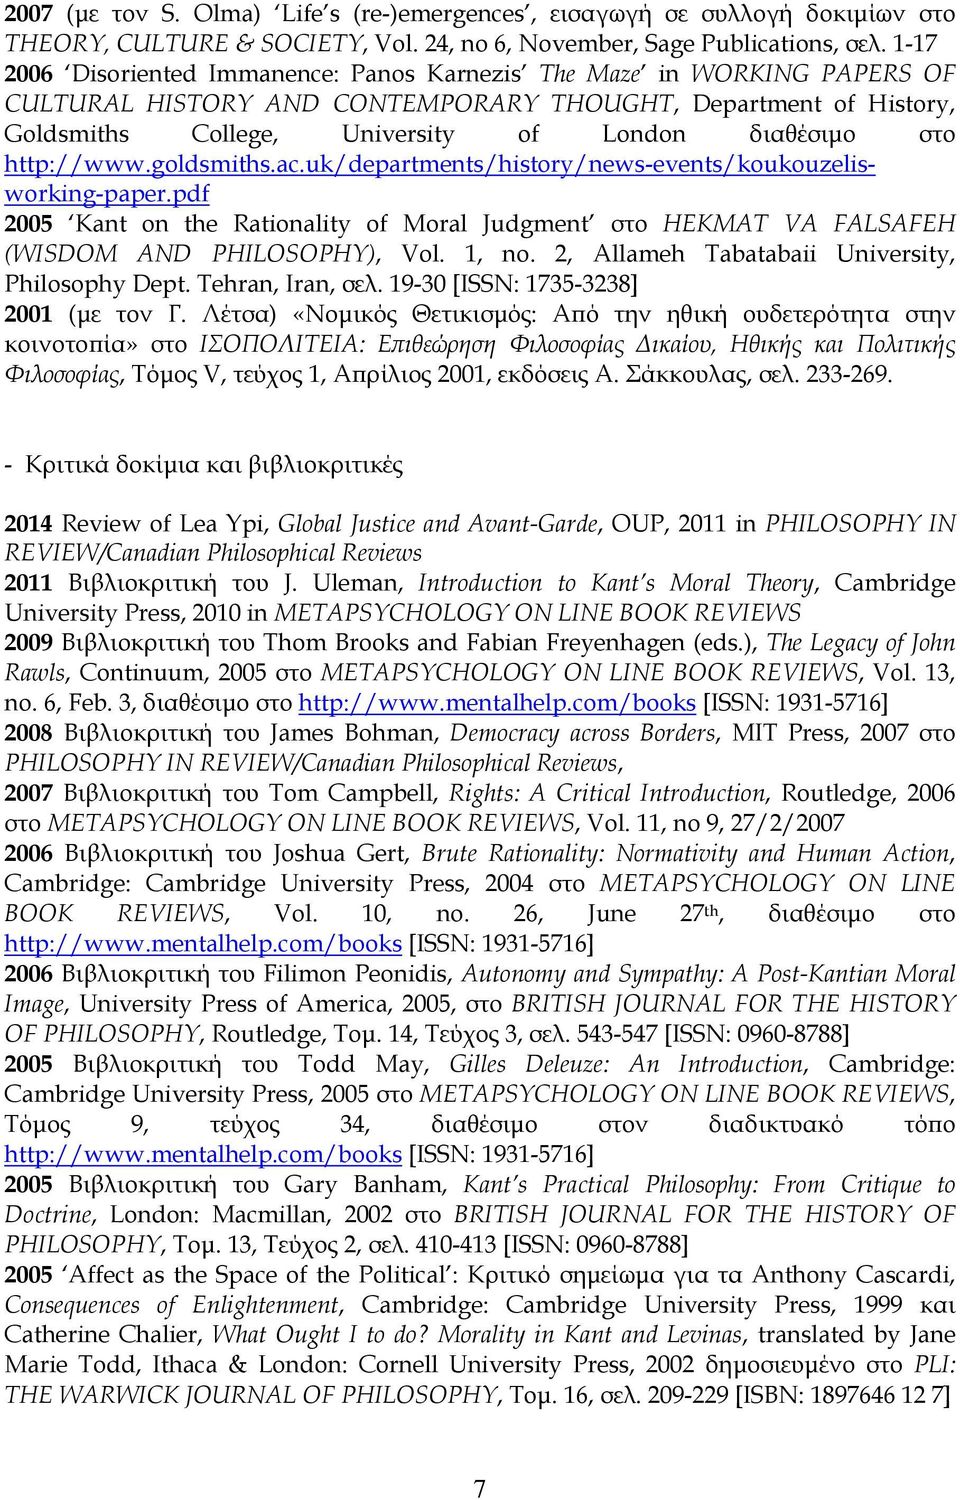 http://www.goldsmiths.ac.uk/departments/history/news-events/koukouzelisworking-paper.pdf 2005 Kant on the Rationality of Moral Judgment στο HEKMAT VA FALSAFEH (WISDOM AND PHILOSOPHY), Vol. 1, no.